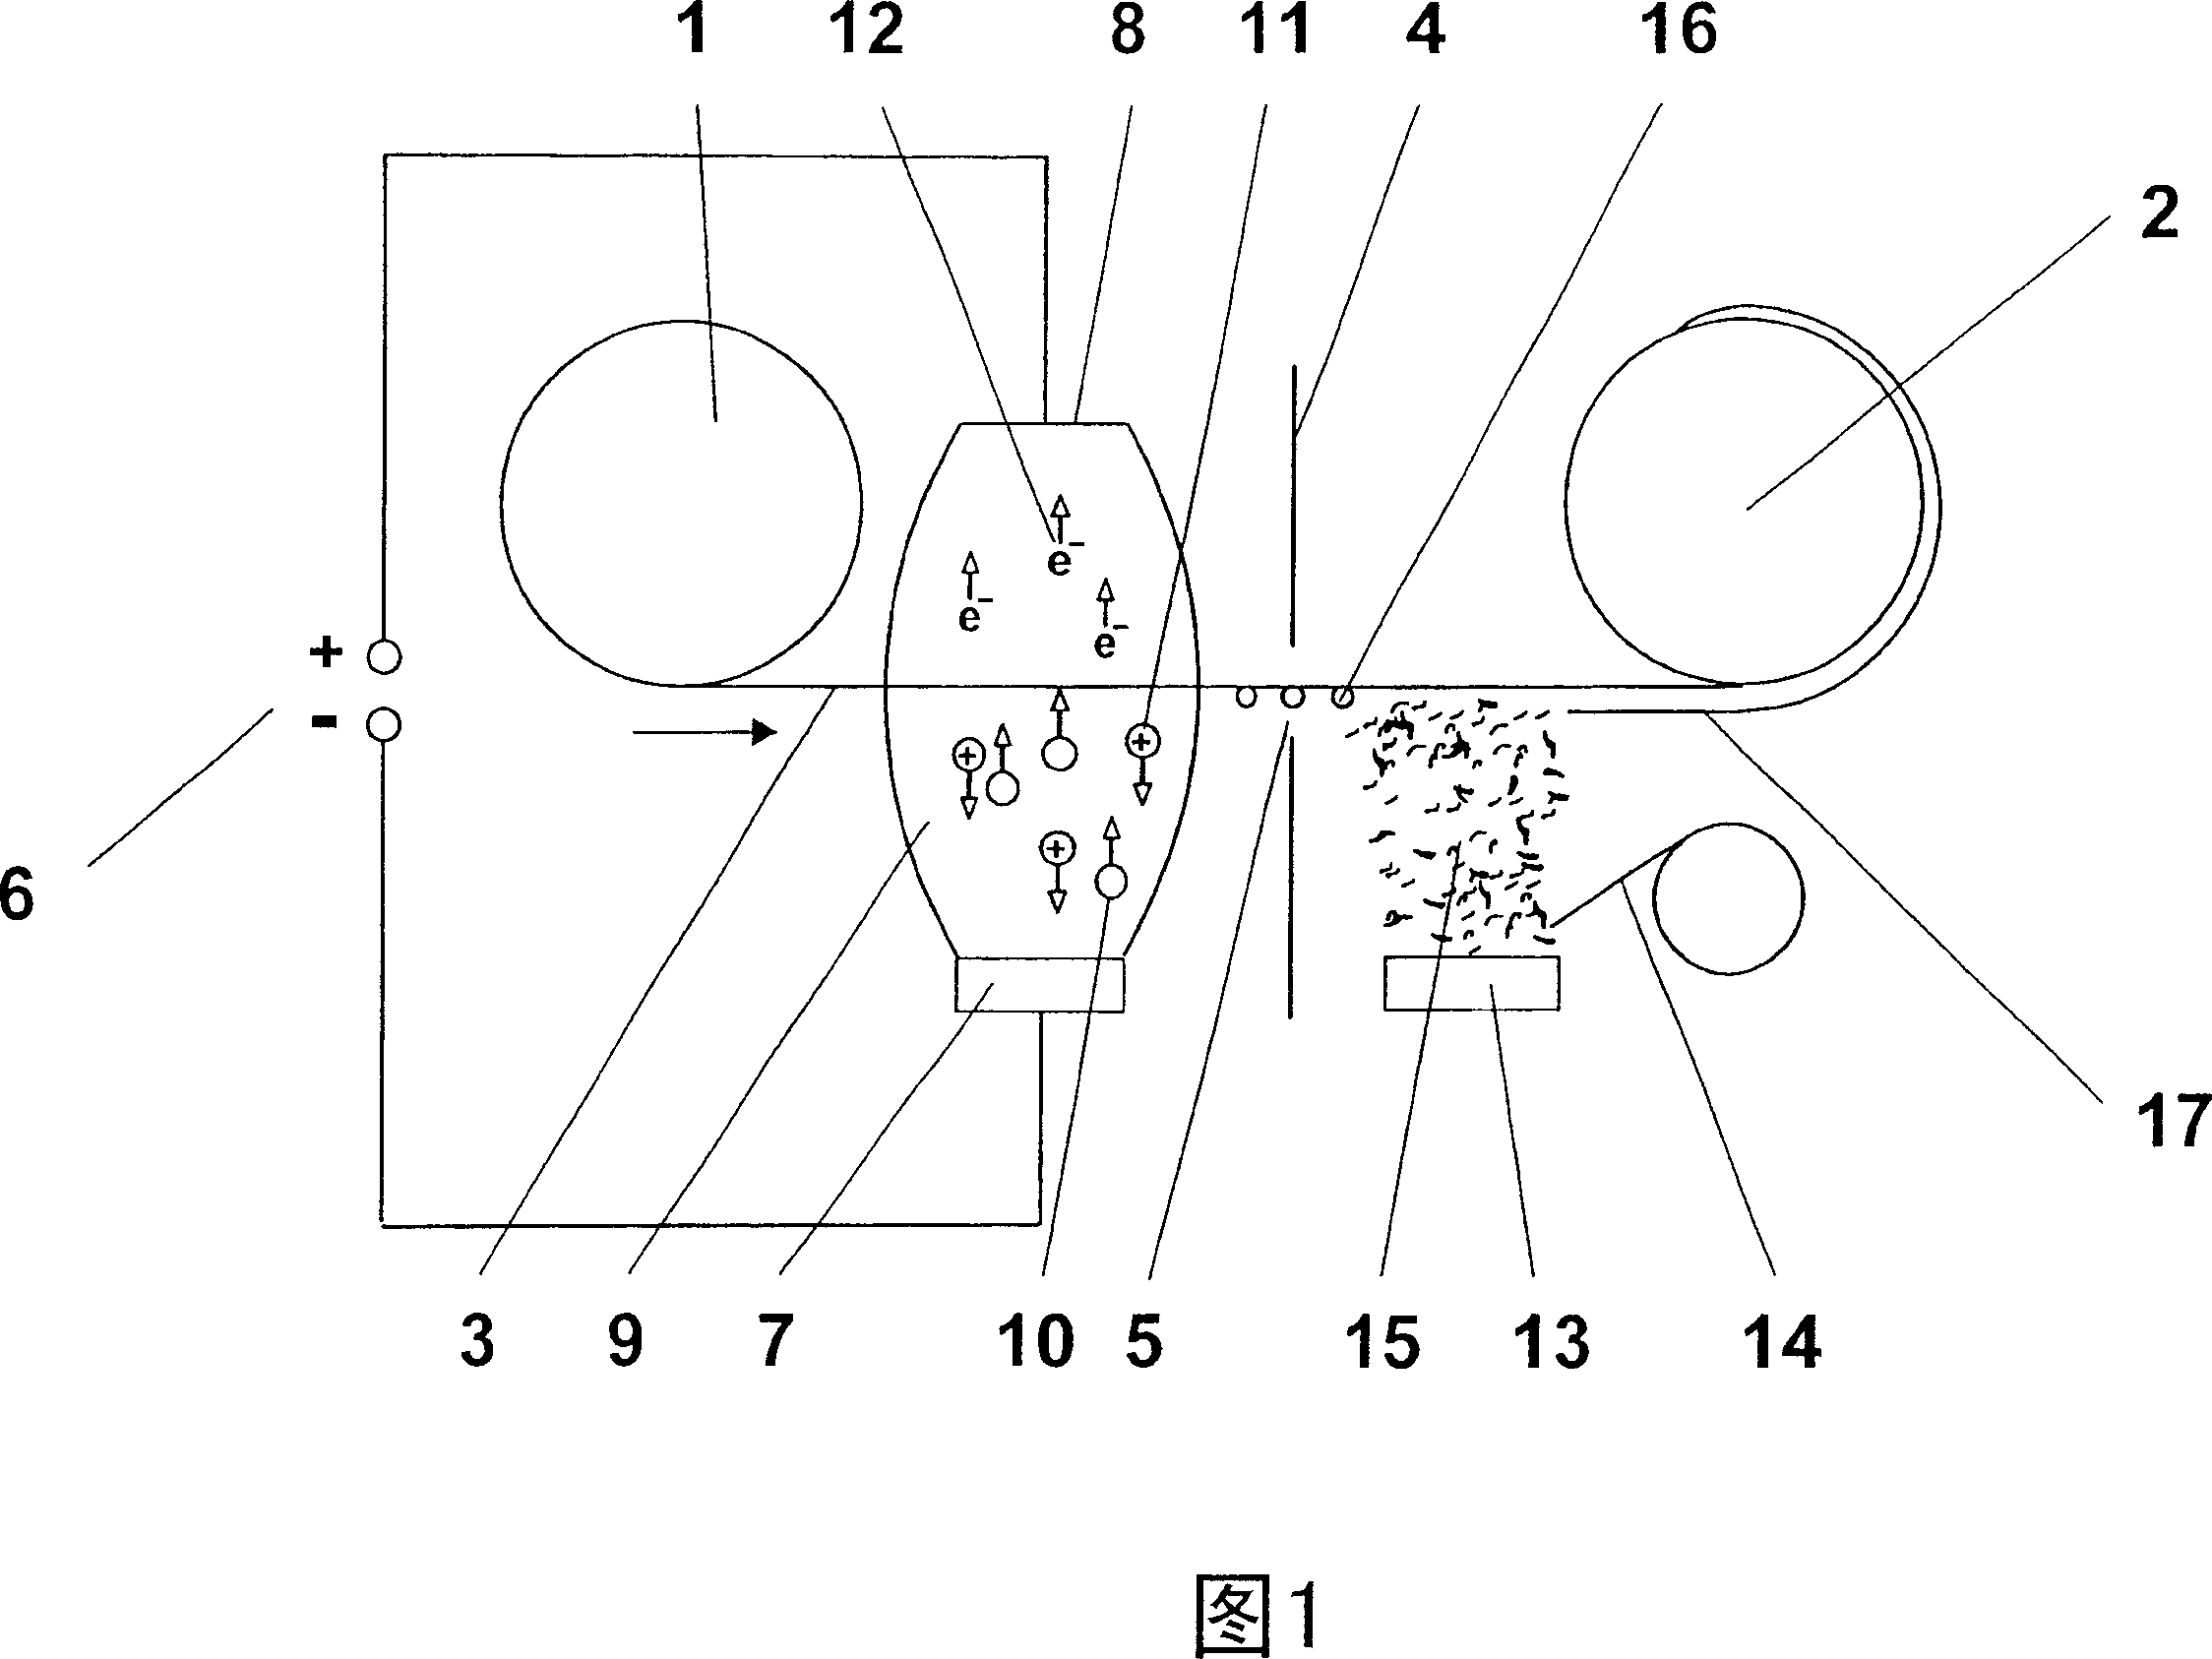 Metallising using thin seed layer deposited using plasma-assisted process